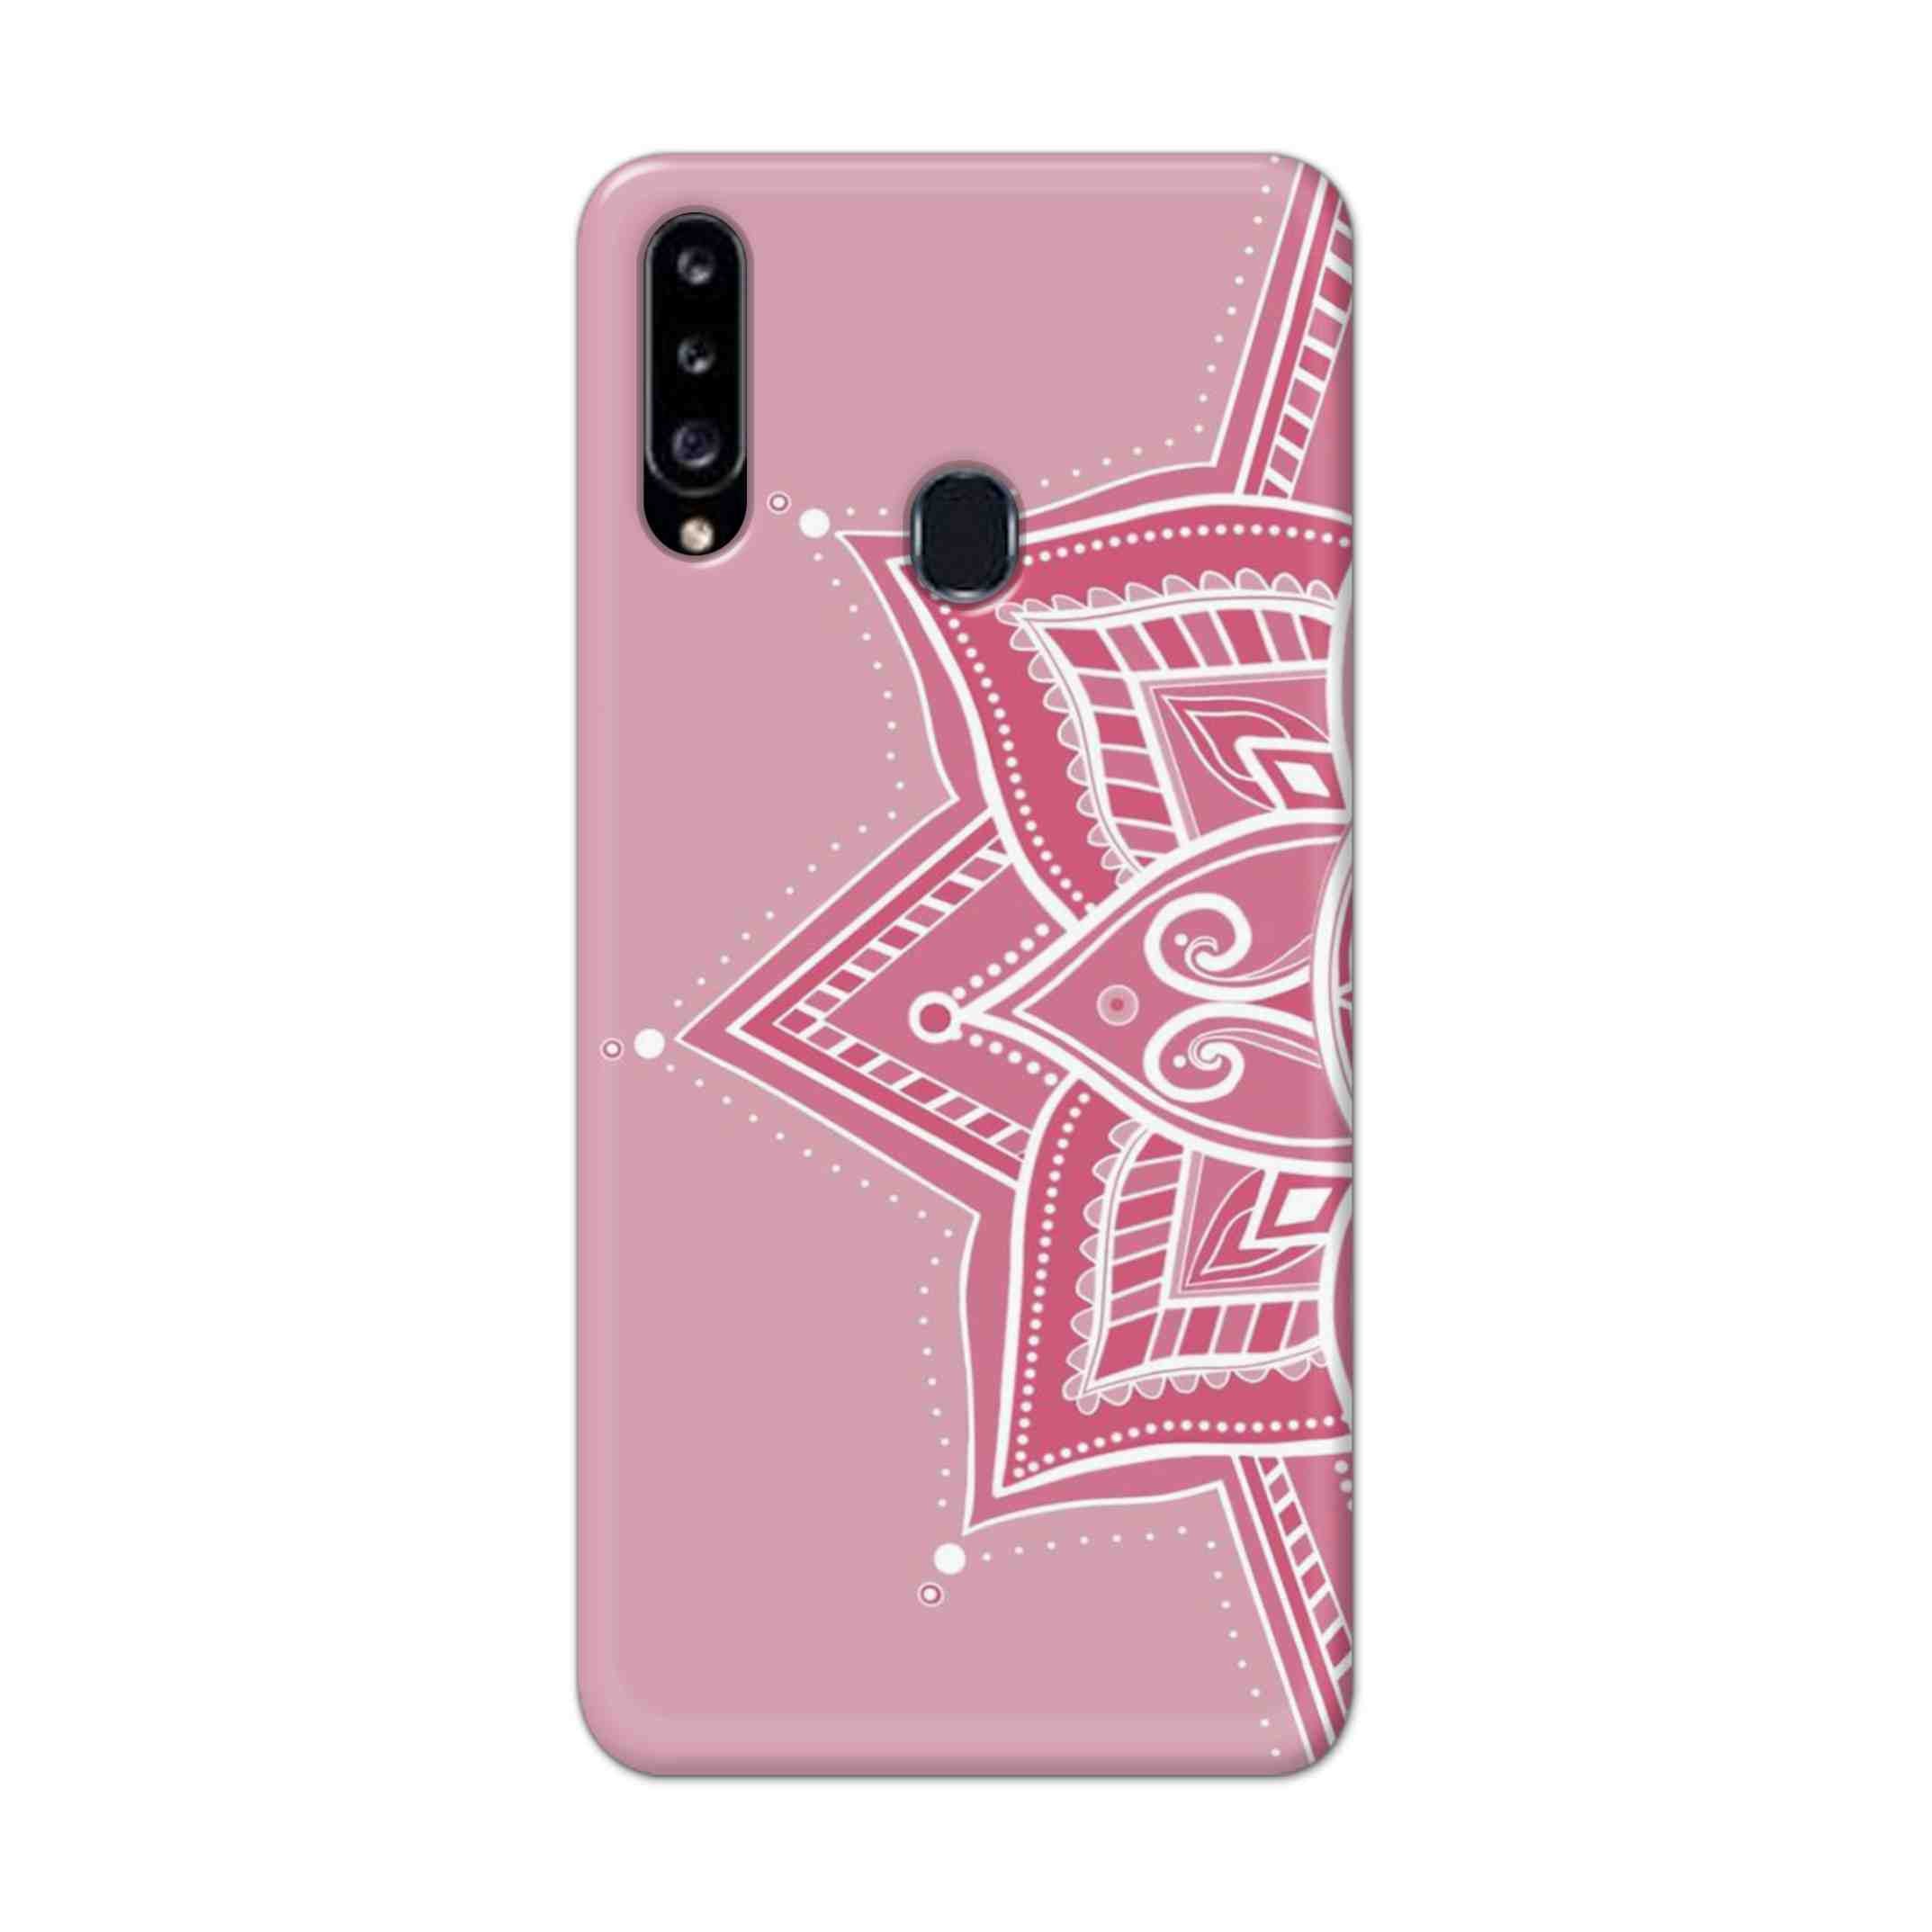 Buy Pink Rangoli Hard Back Mobile Phone Case Cover For Samsung Galaxy A21 Online